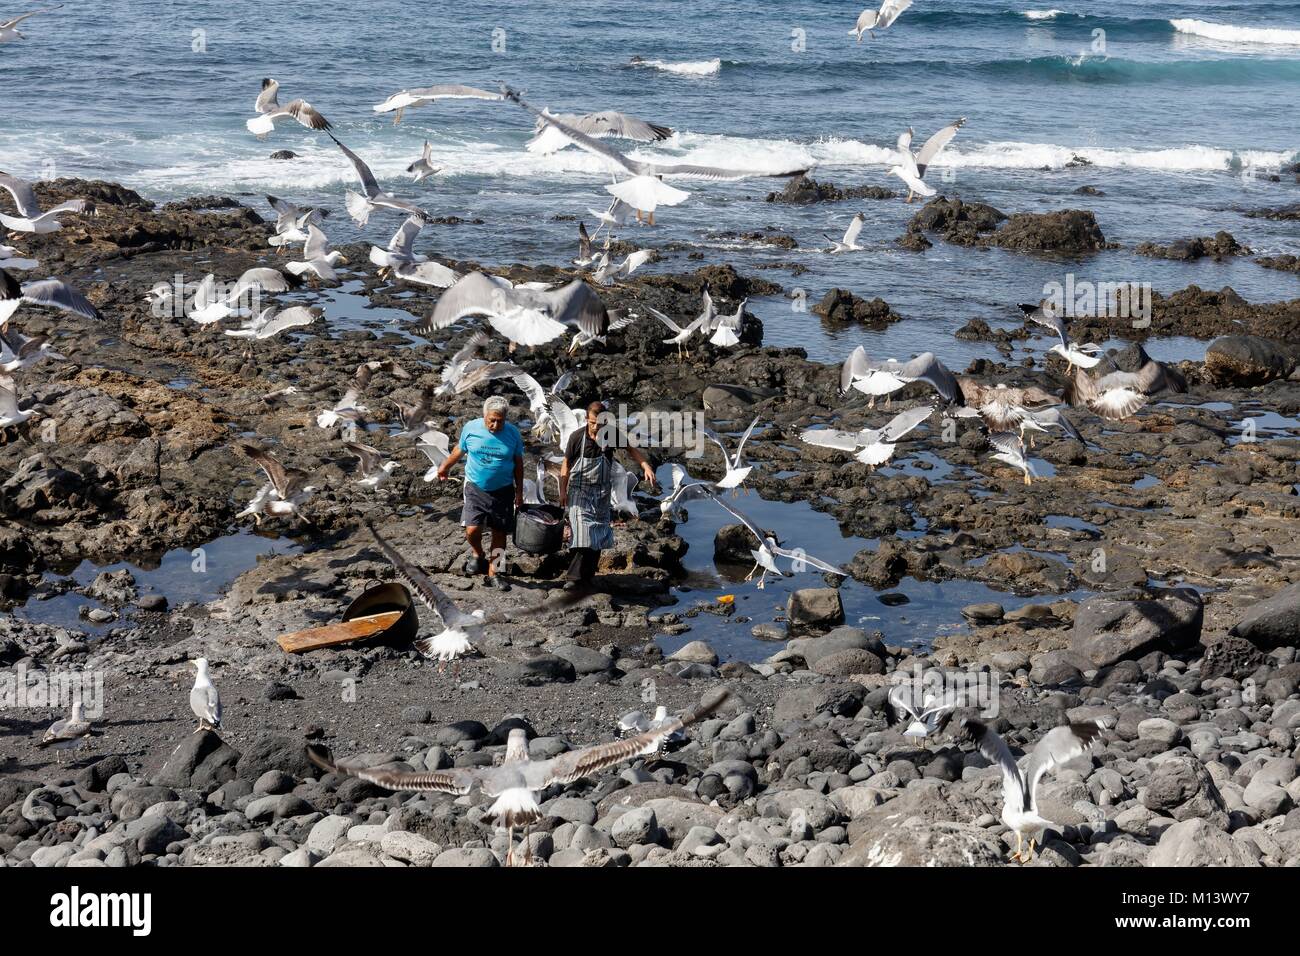 Spain, Canary Islands, Lanzarote Island, gulls flying over two men carrying fishes Stock Photo